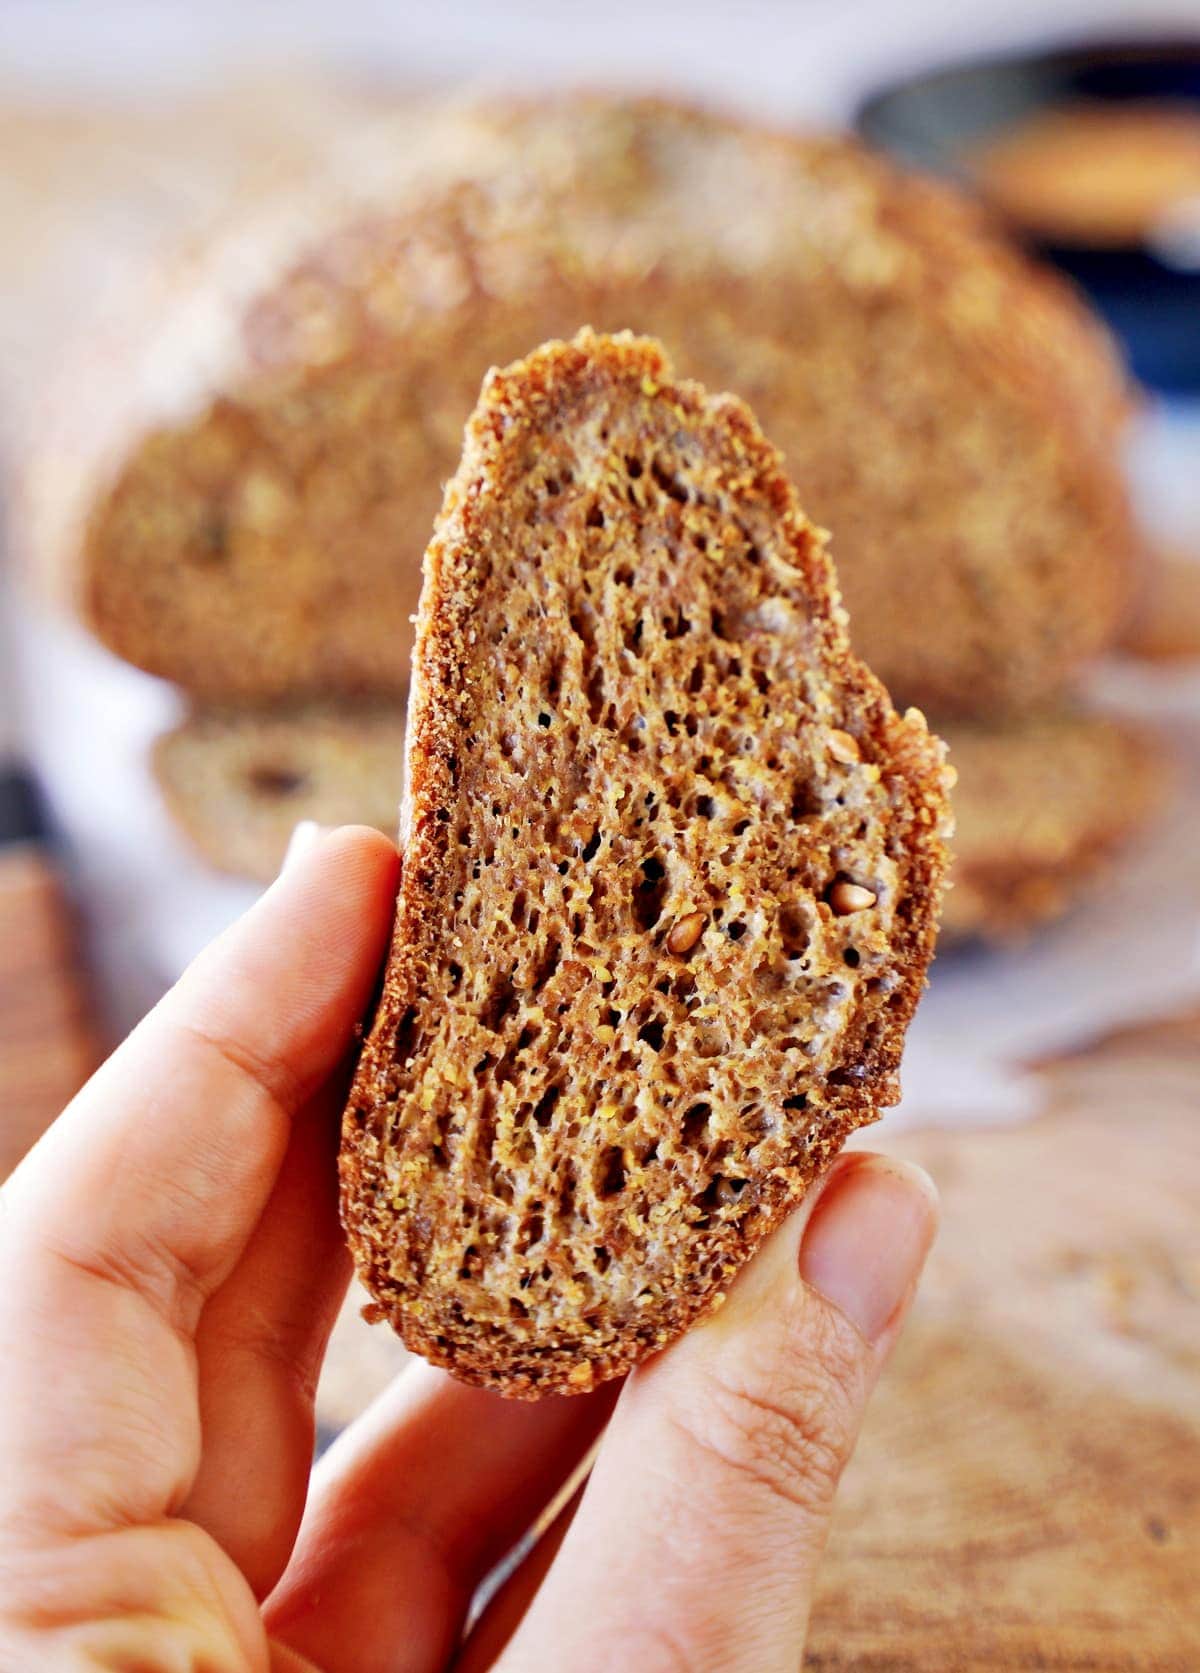 hand holding a small slice of homemade low-carb bread